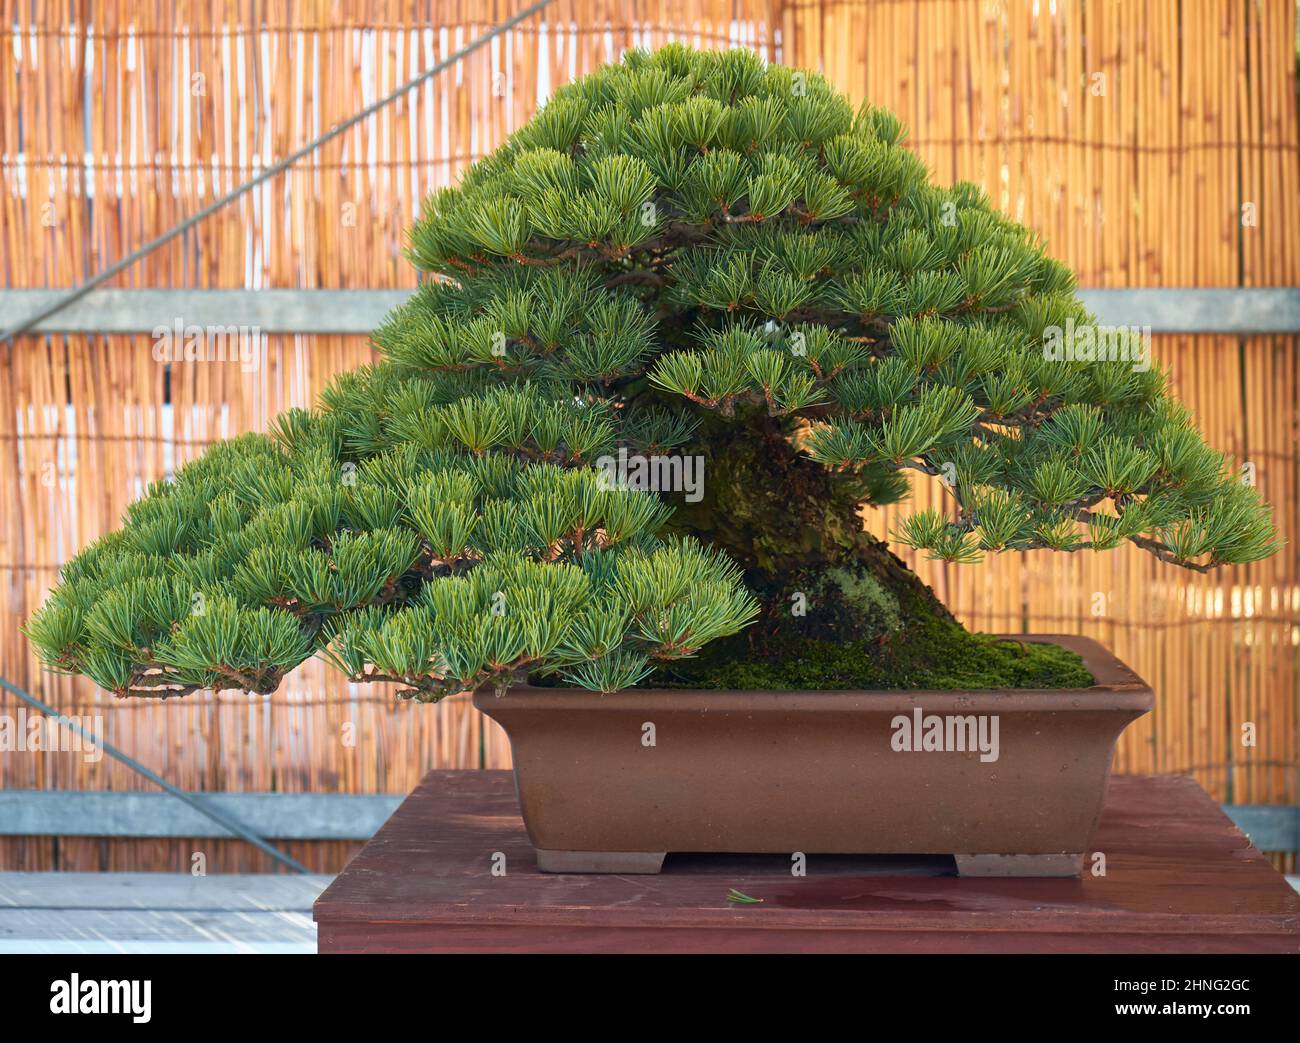 Nagoya, Japan - October 20, 2019: The view of the decorative bonsai tree of Japanes Black pine at the annual Nagoya Castle Bonsai Show. Nagoya. Japan Stock Photo